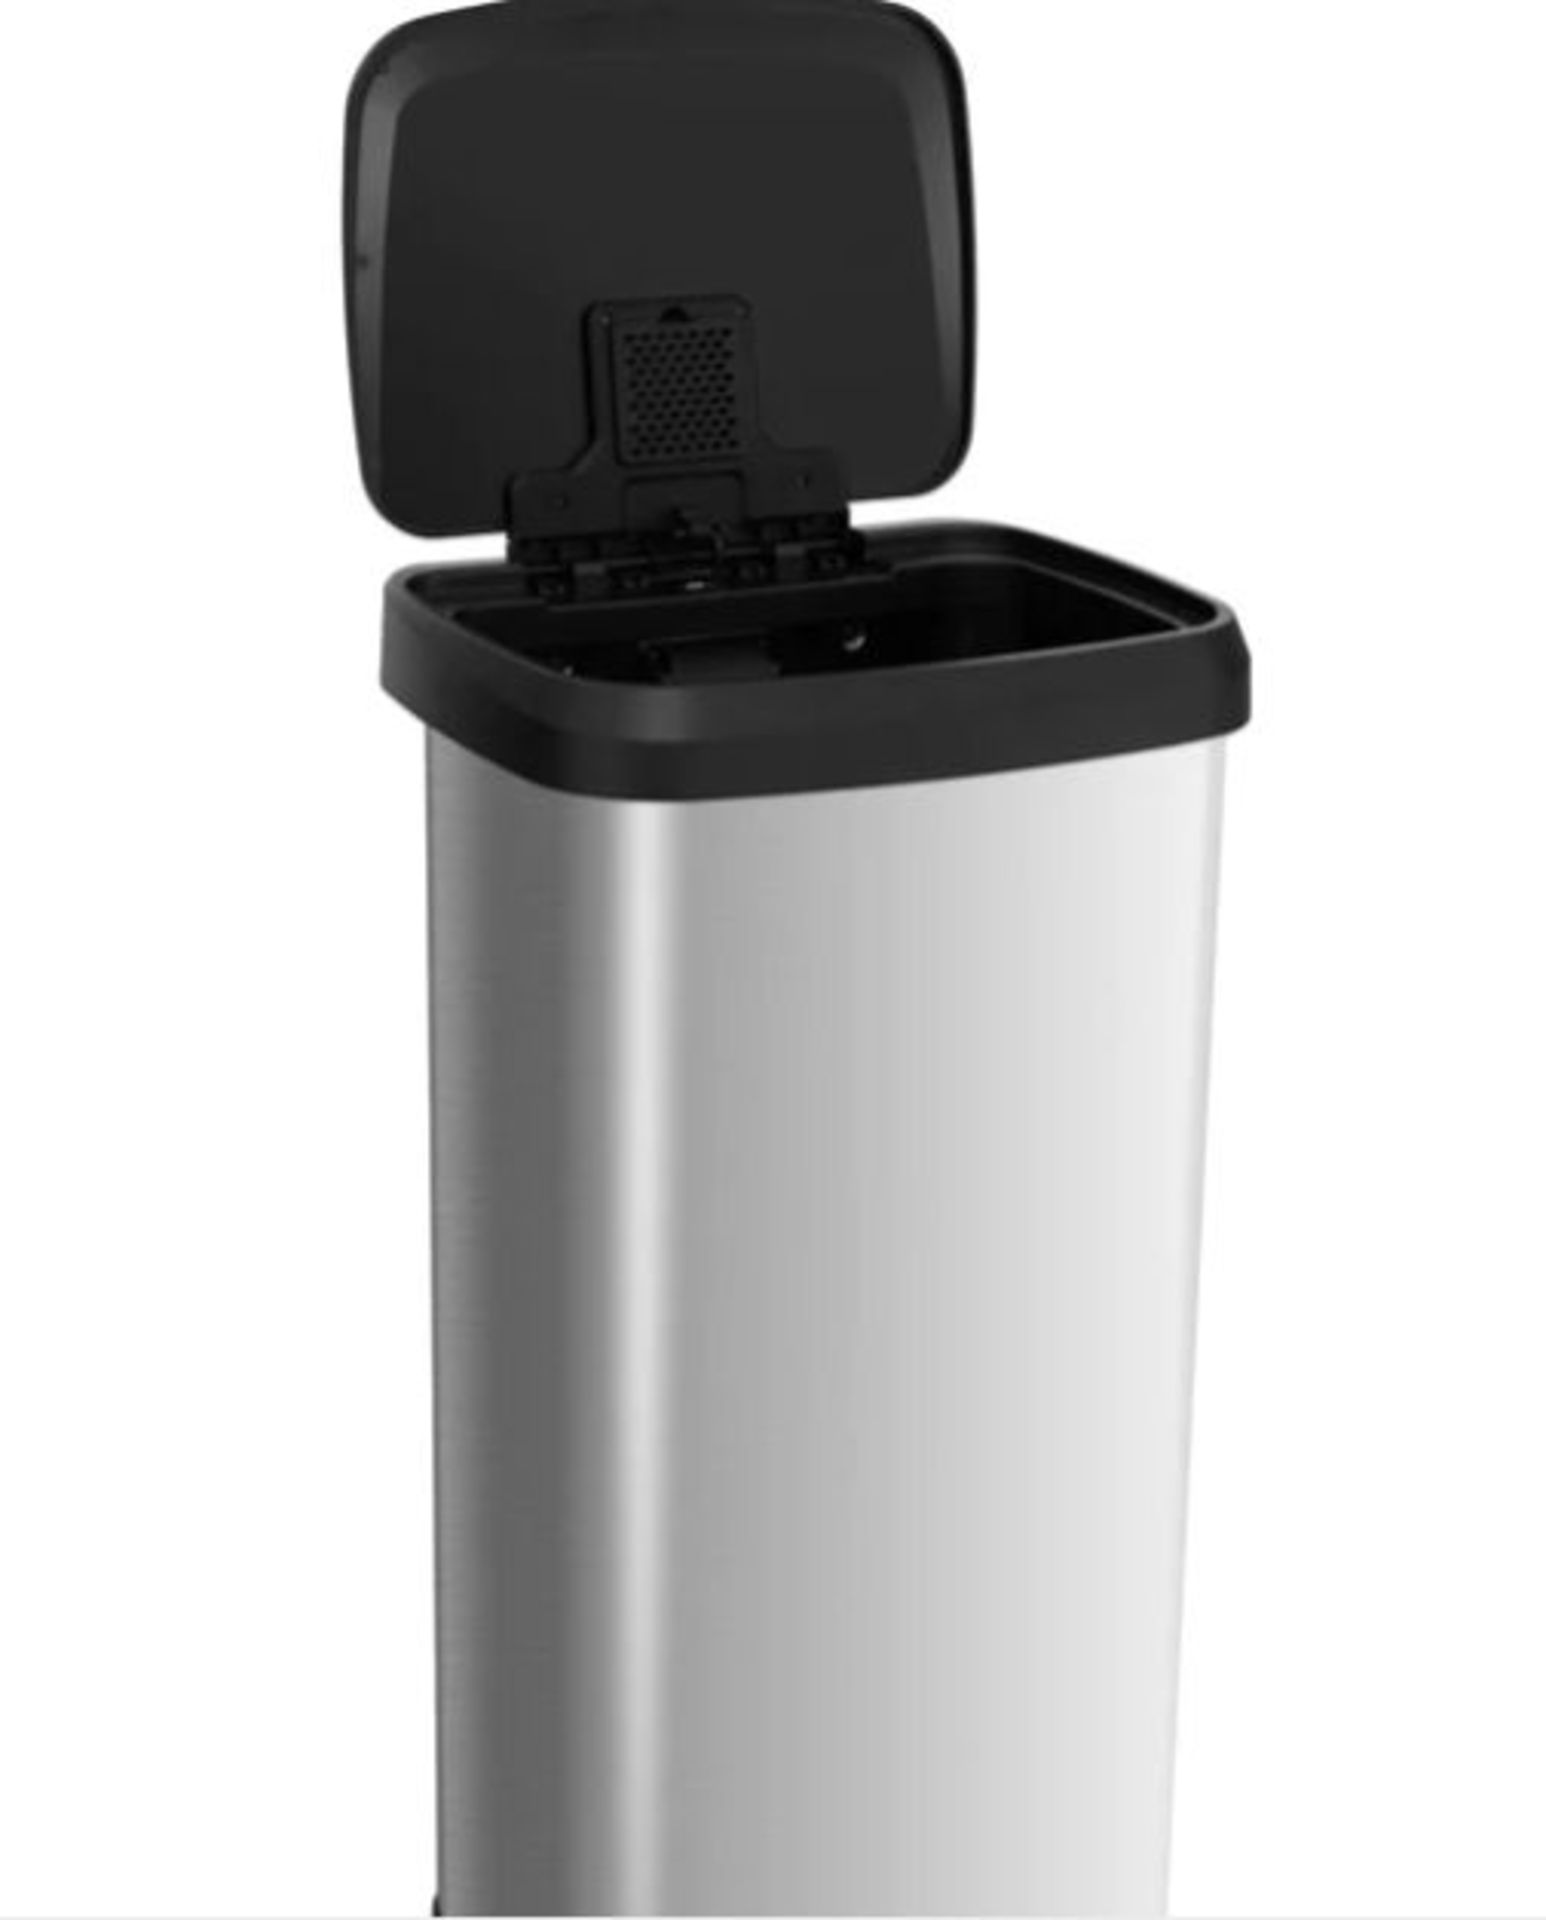 68L STEP TRASH CAN WITH SOFT CLOSE LID AND DEODORIZER COMPARTMENT-SILVER. - ER53.